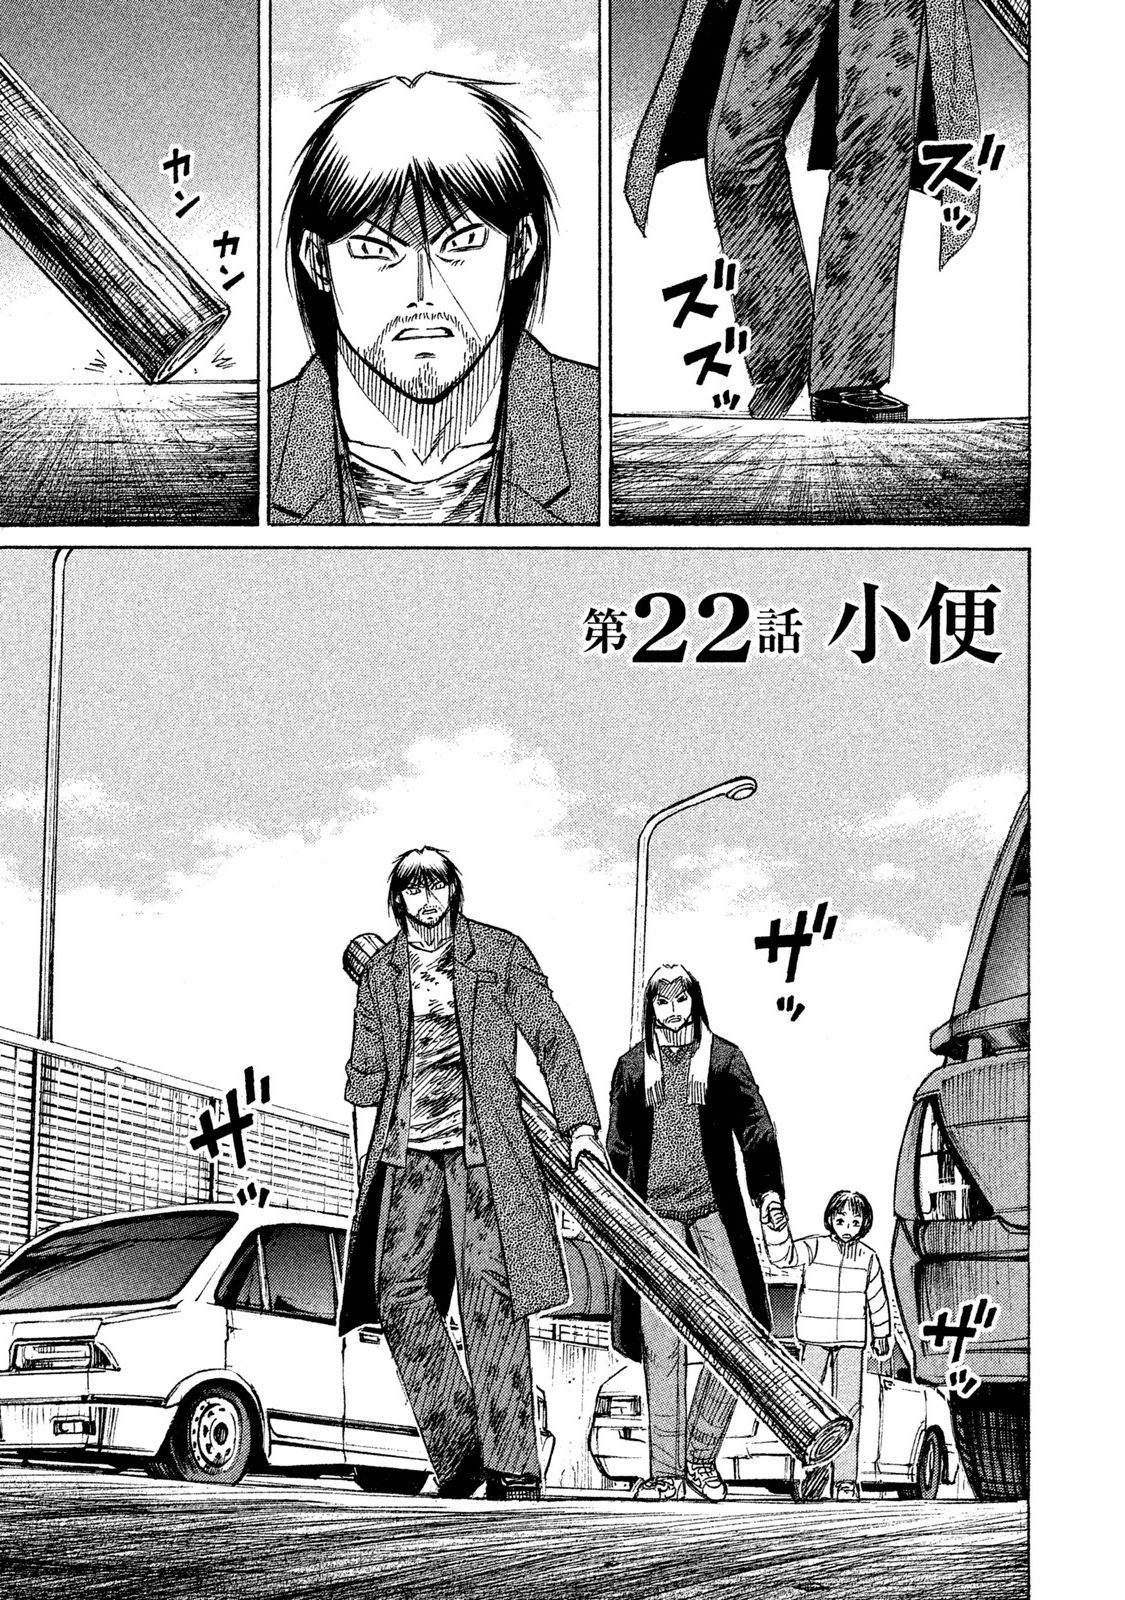 Higanjima - 48 Days Later Vol.3 Chapter 22: The Highway - Picture 2